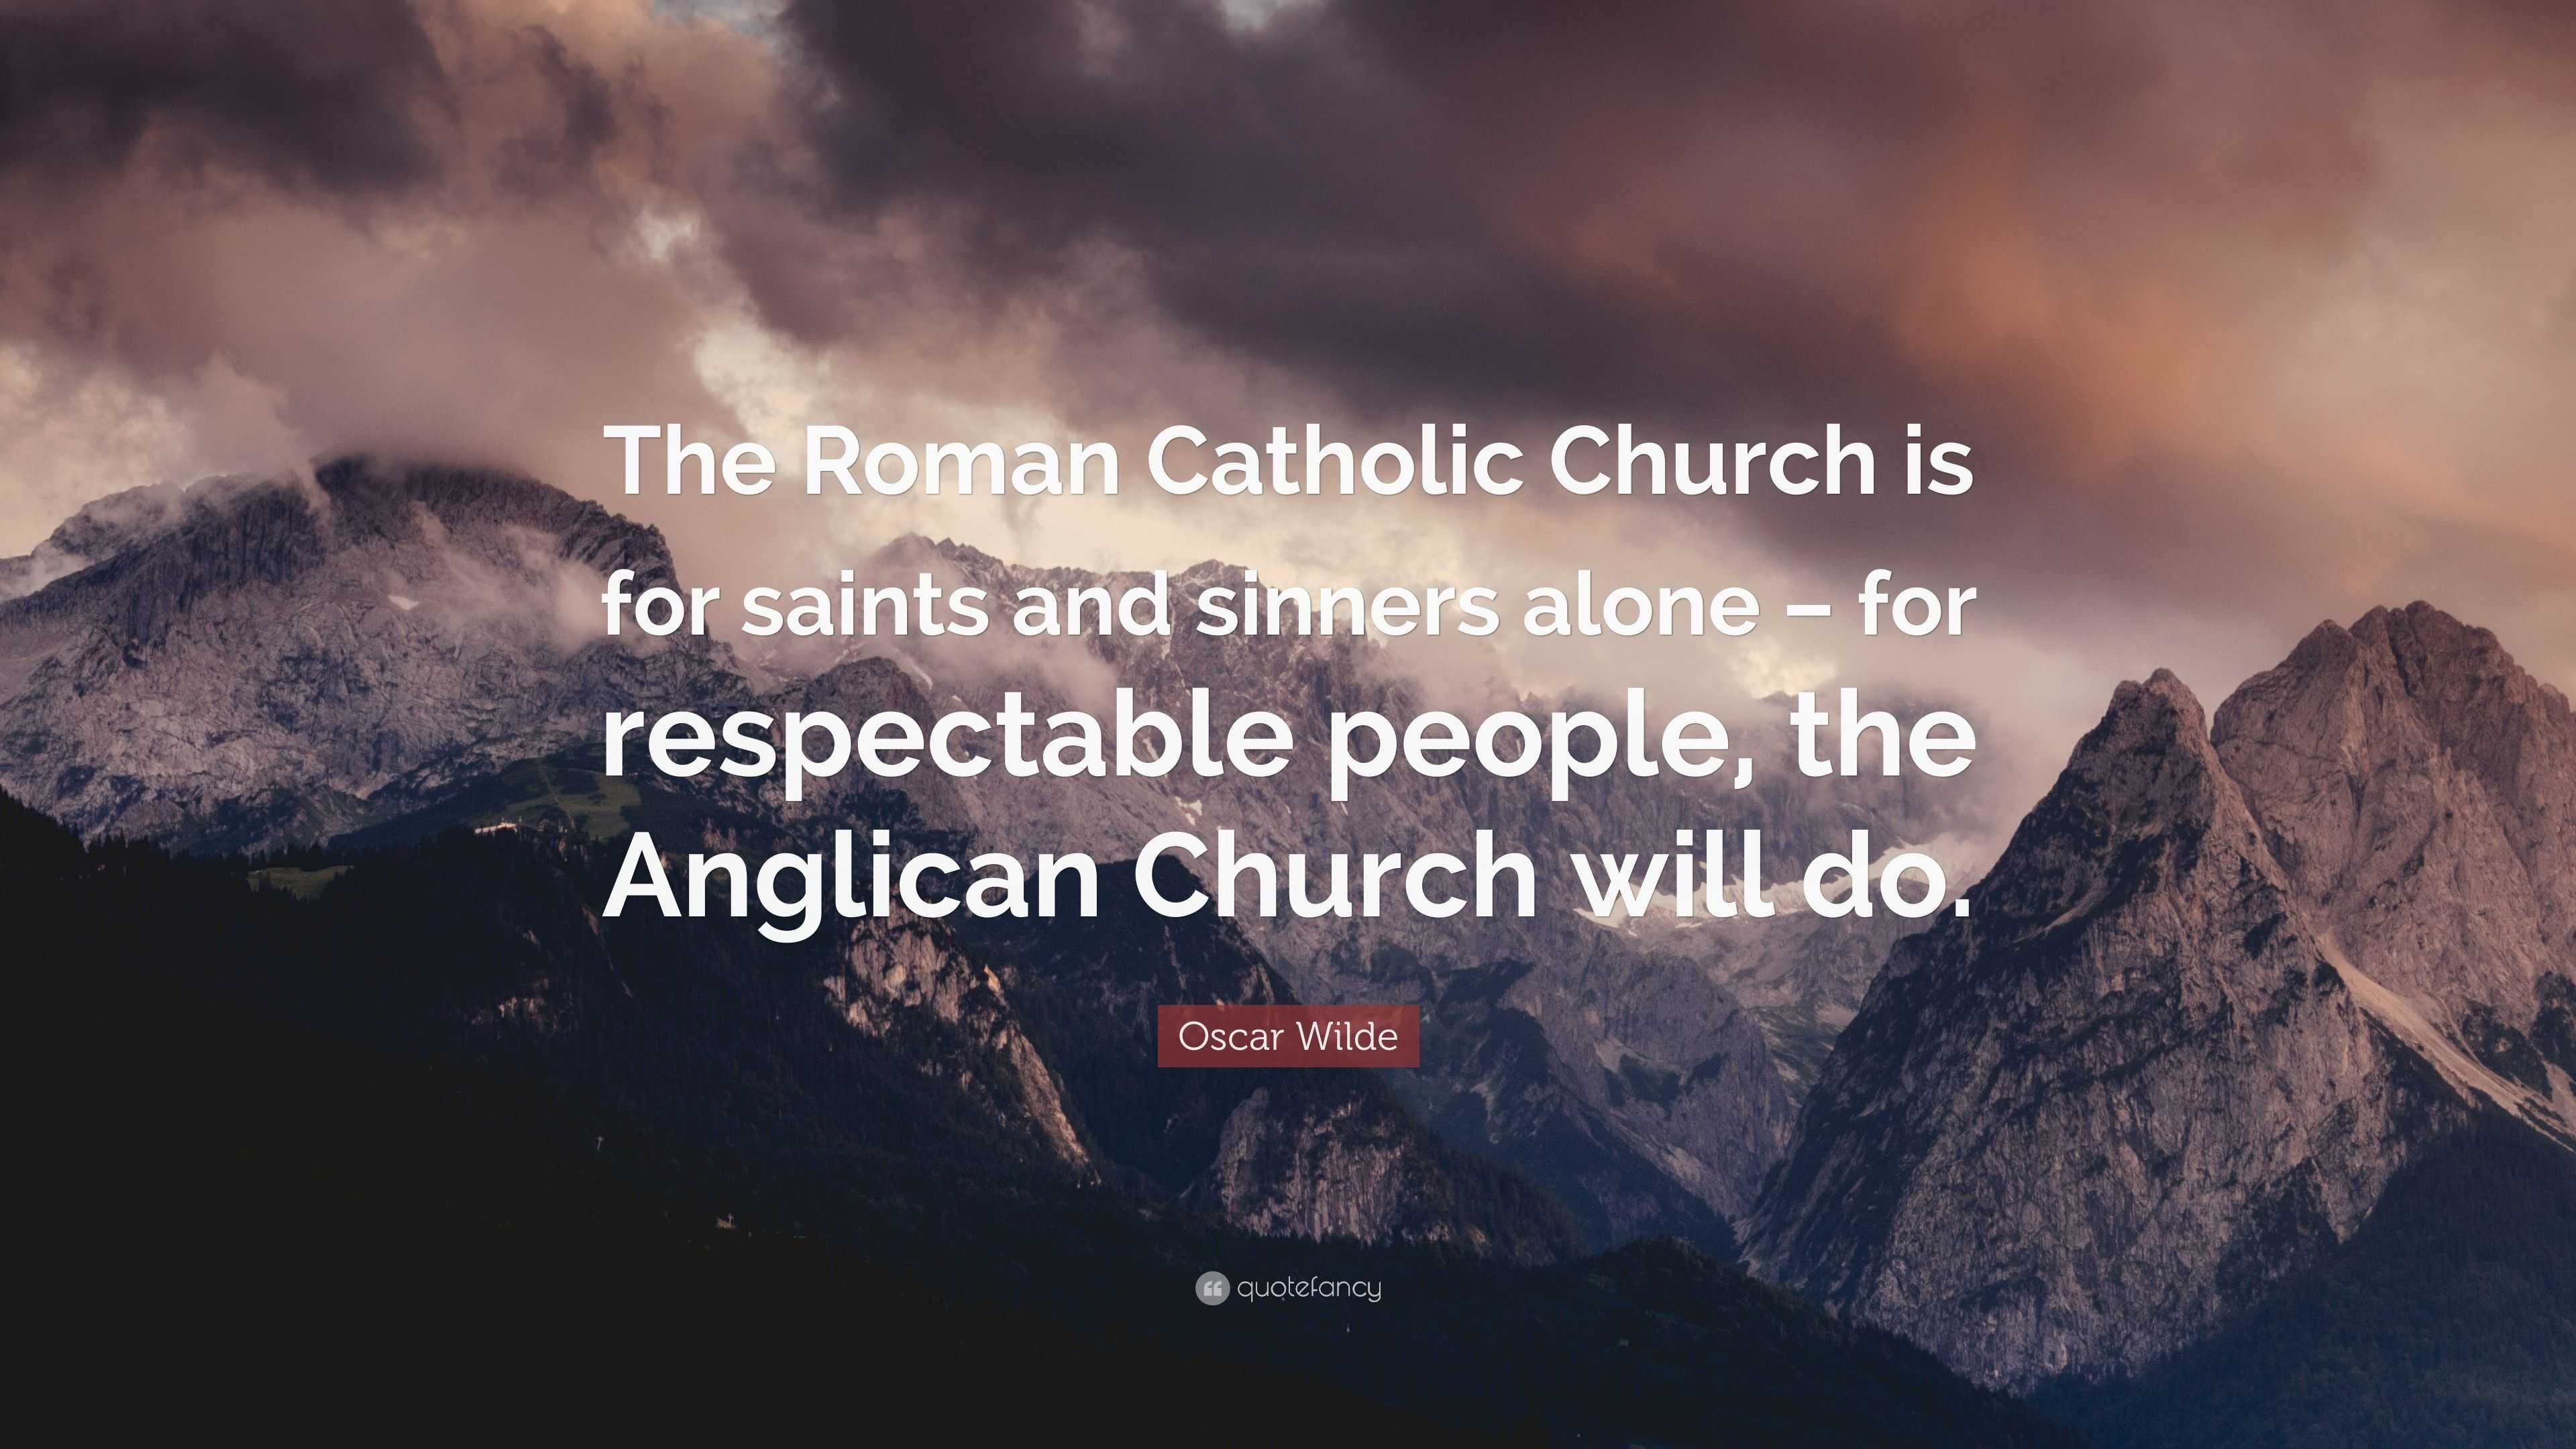 Oscar Wilde Quote: “The Roman Catholic Church is for saints and